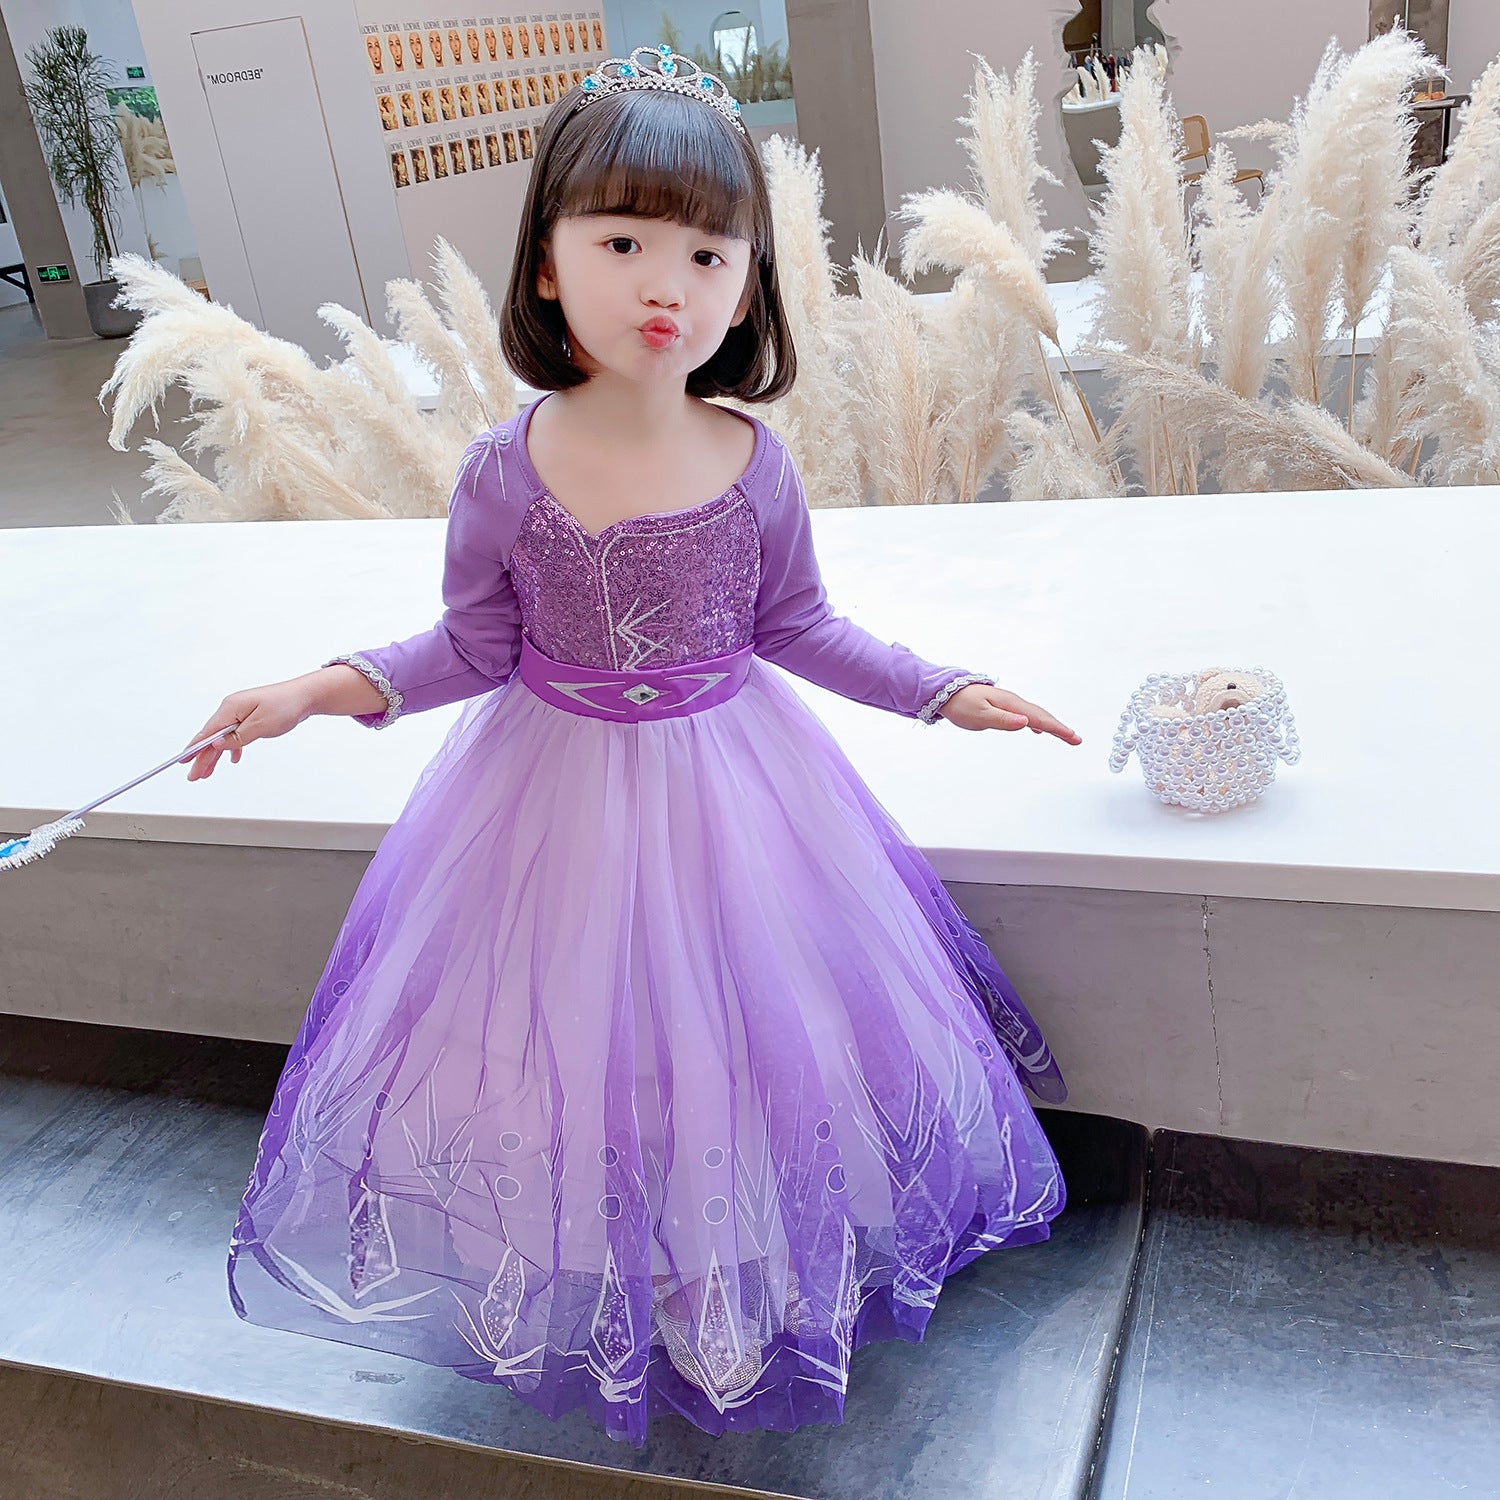 Kids latest cape style dresses | Gowns for girls, Party wear dresses, Baby  gowns girl